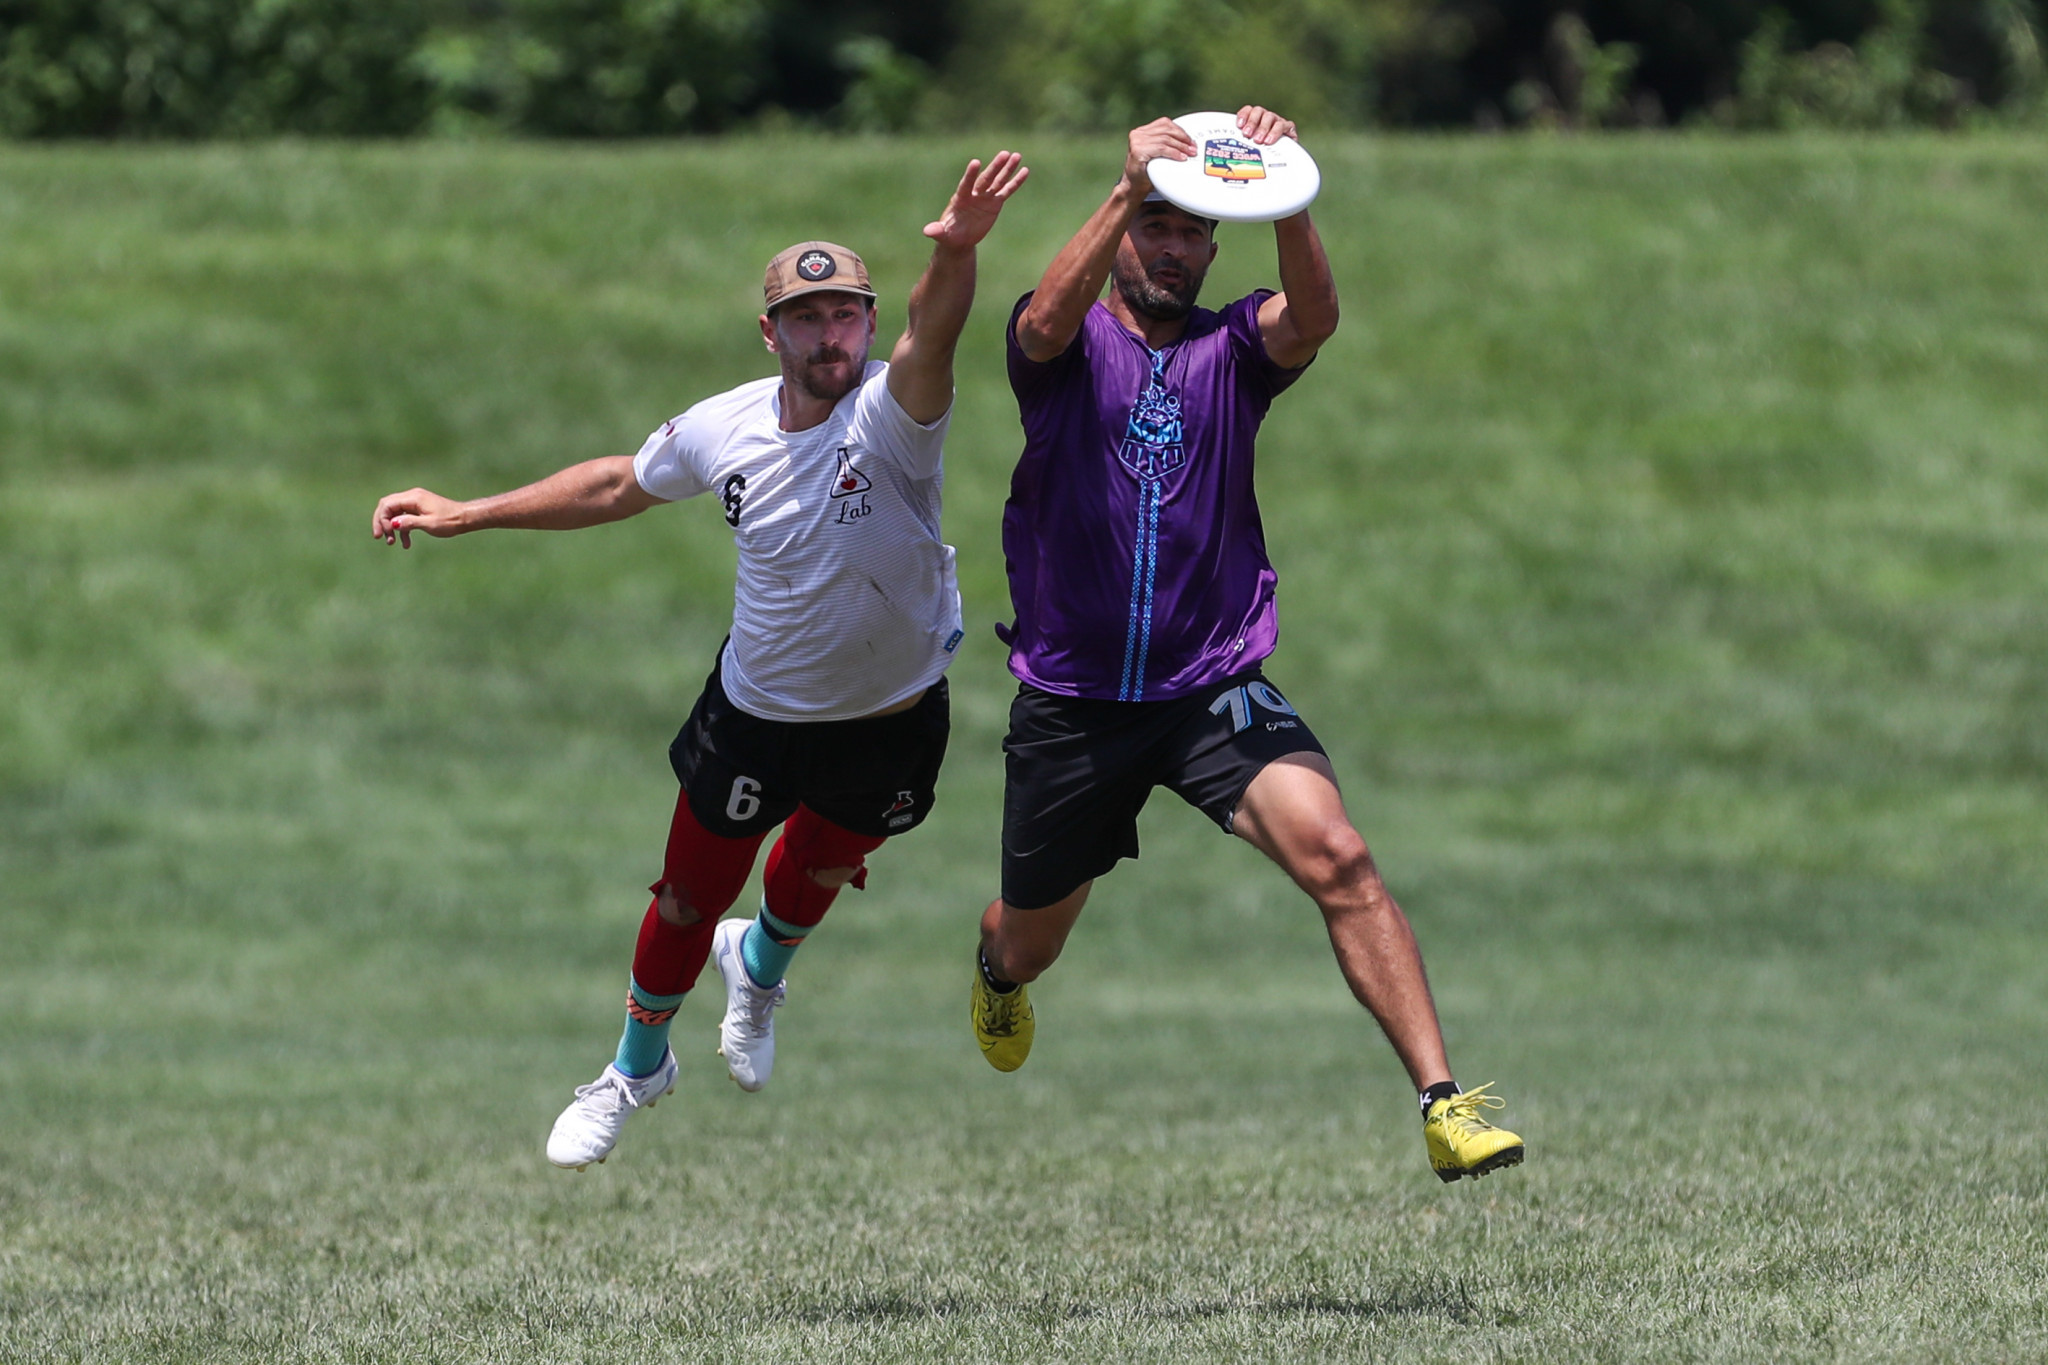  LAB's Felix Marceau, left, and Maconda's Daniel Montoya, right, battled for the disc during their match ©Paul Rutherford for UltiPhotos